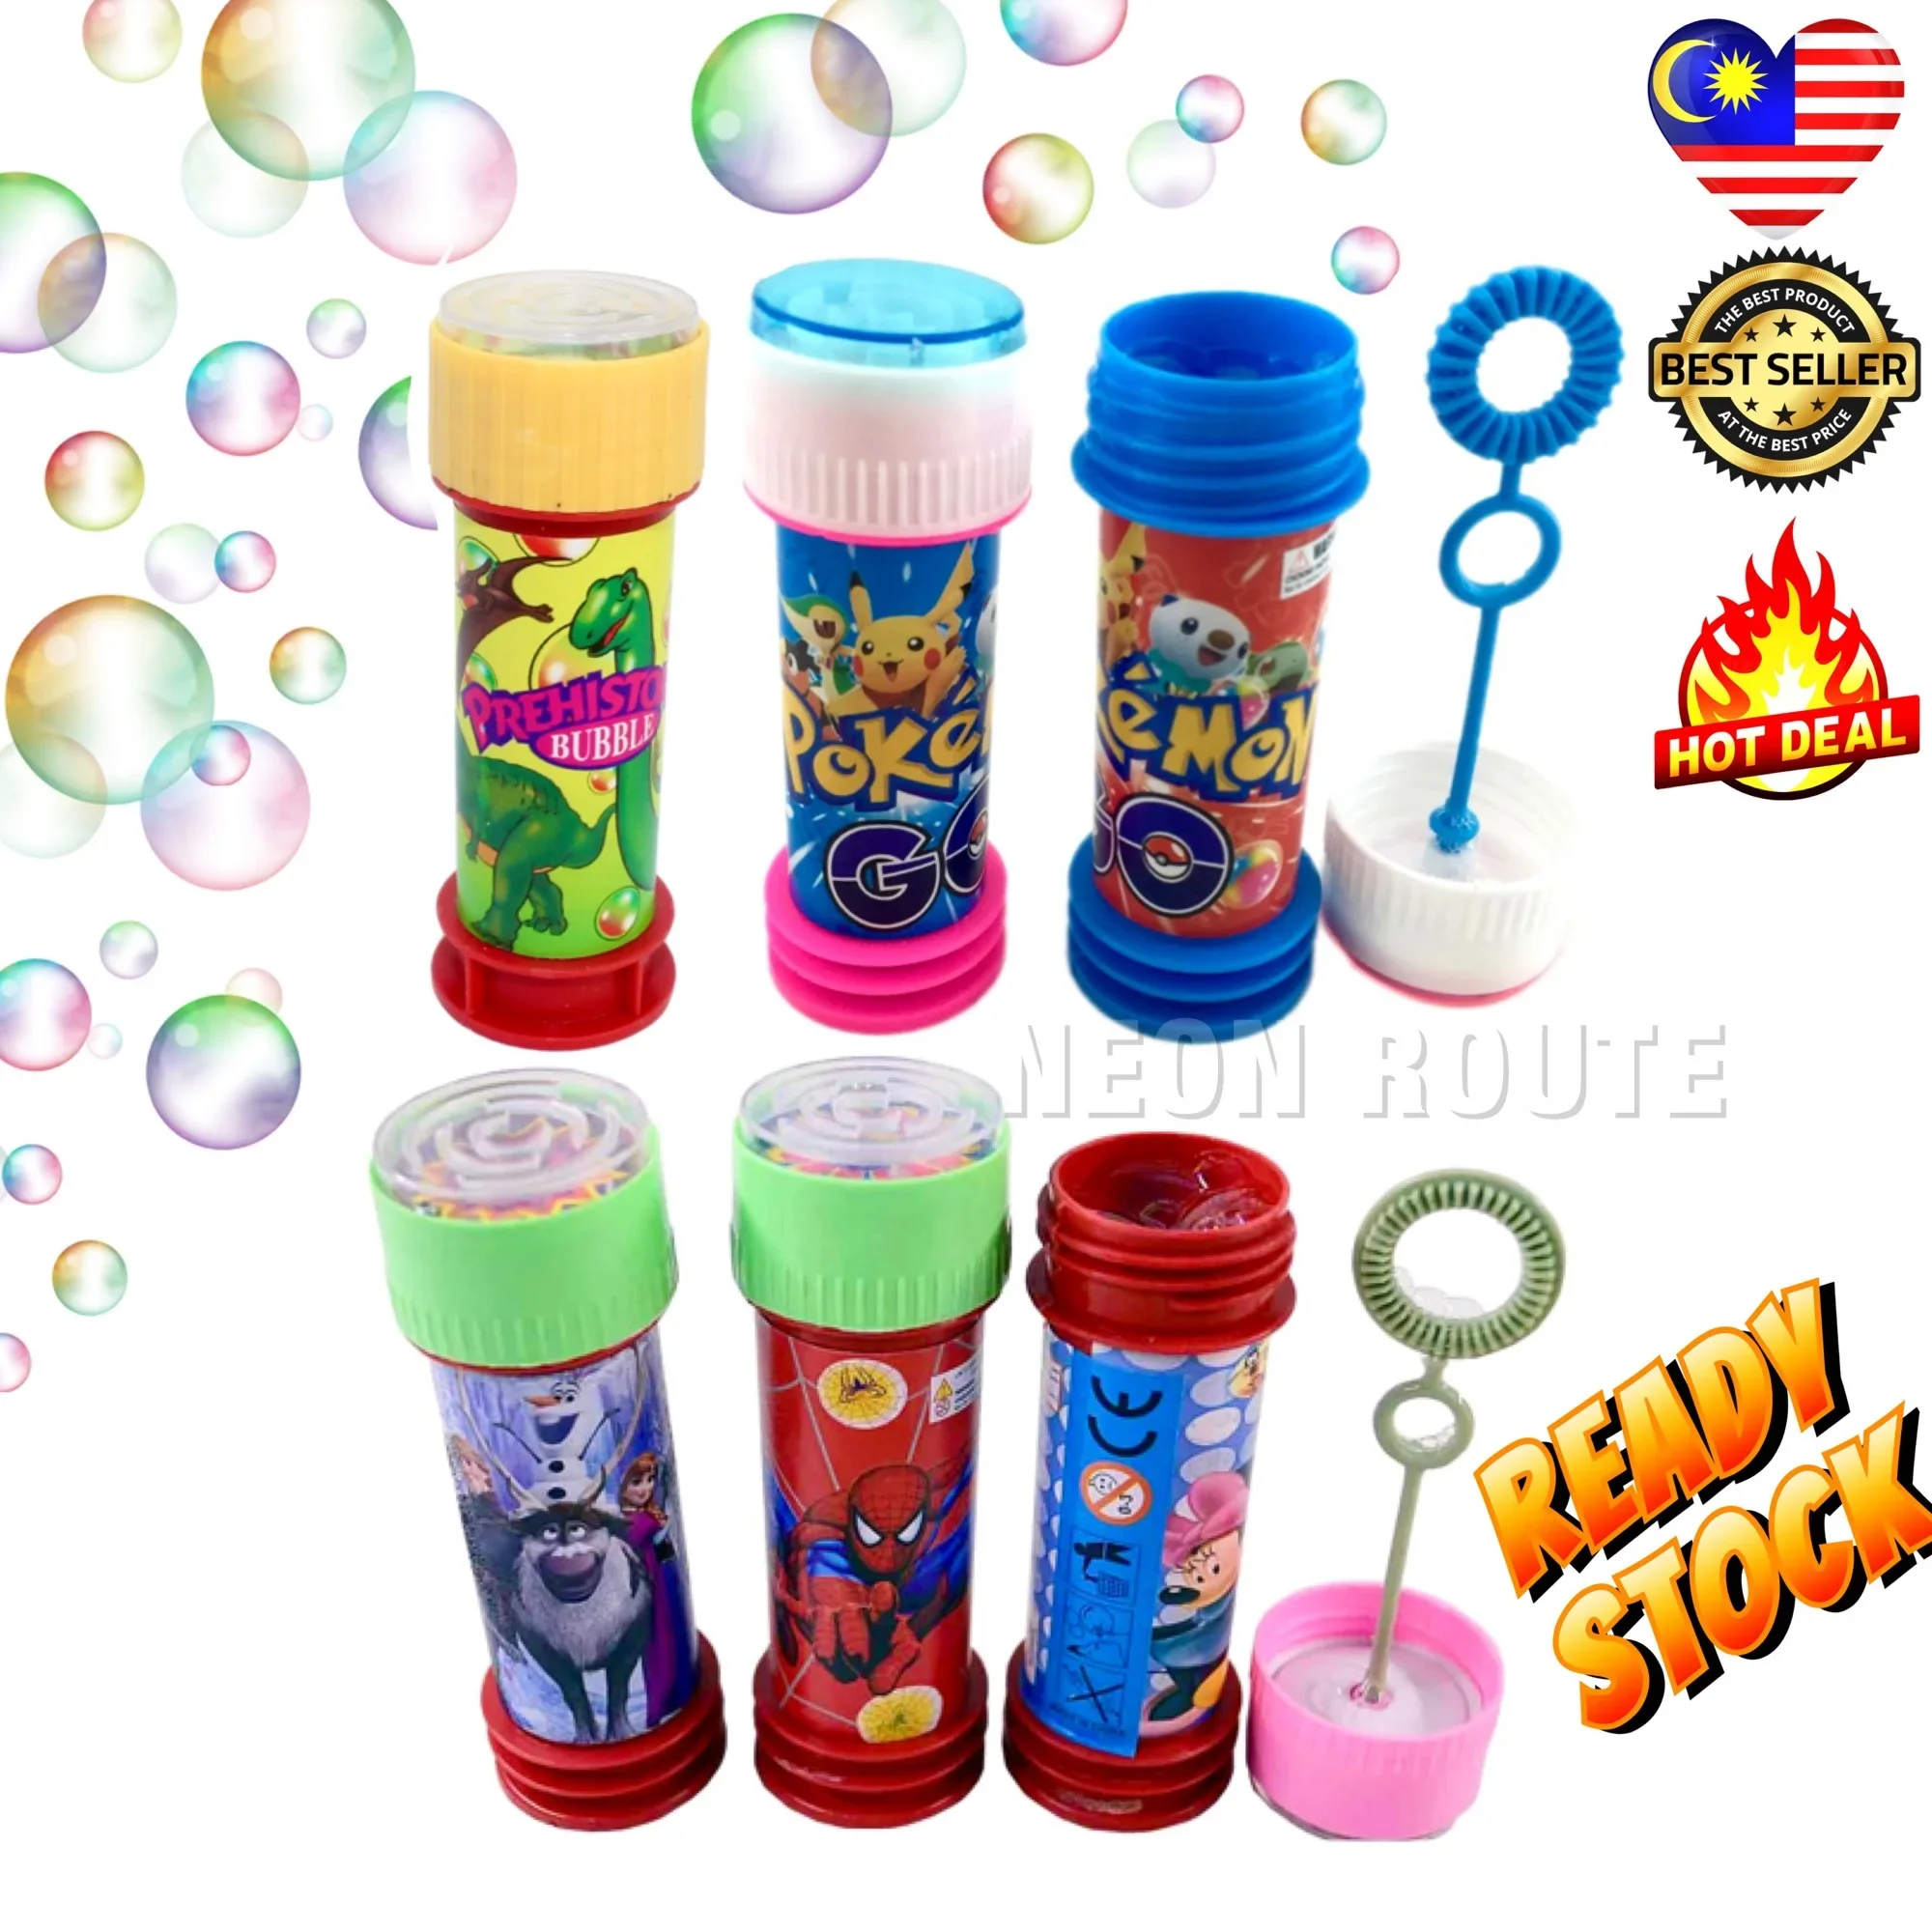 Cartoon Bubble Blowing Toy. Soap Bubble Outdoor Kids Toys. Cheap Children's toys, gifts, party pack ideas